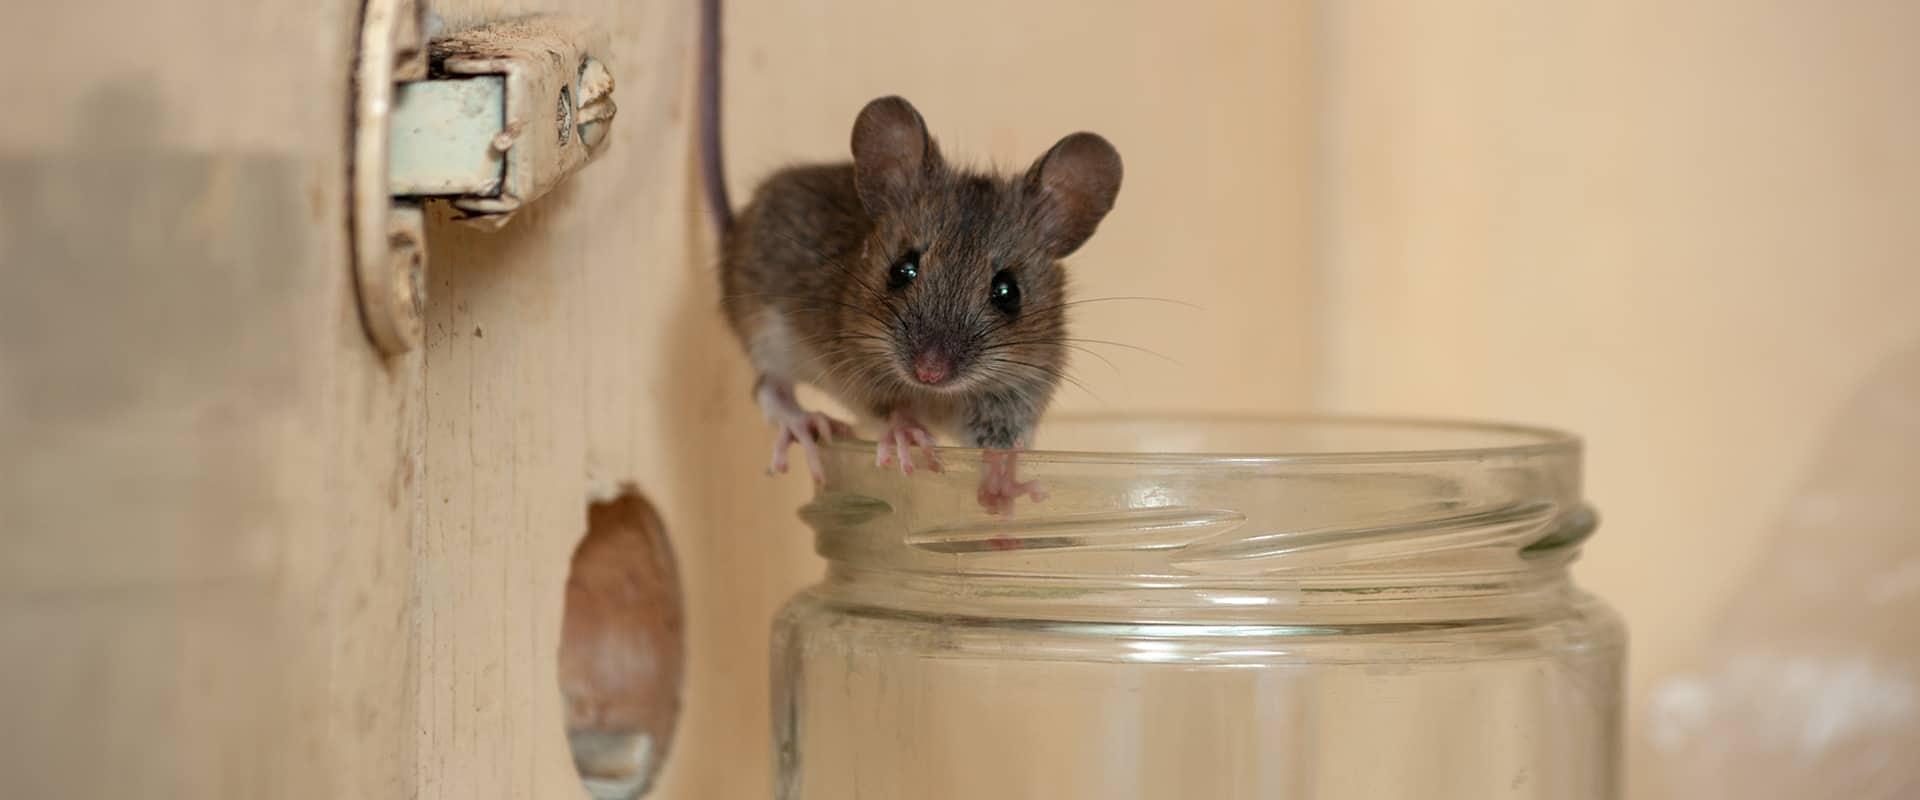 a mouse climbing on the rim of a glass in a home in bethesda maryland